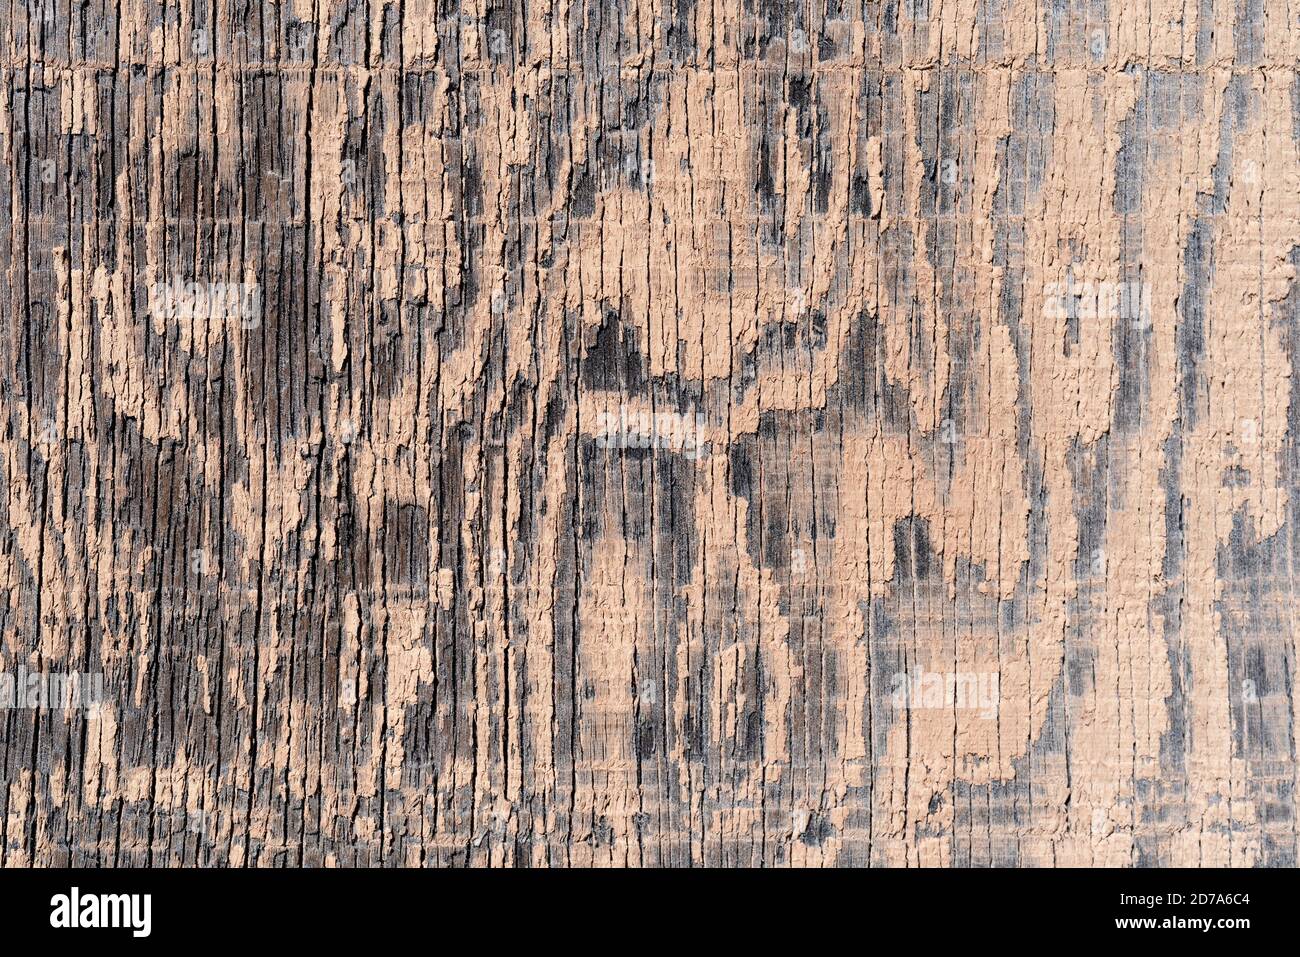 The surface of old exterior plywood with very faded beige paint showing wood and wear from weather. Stock Photo